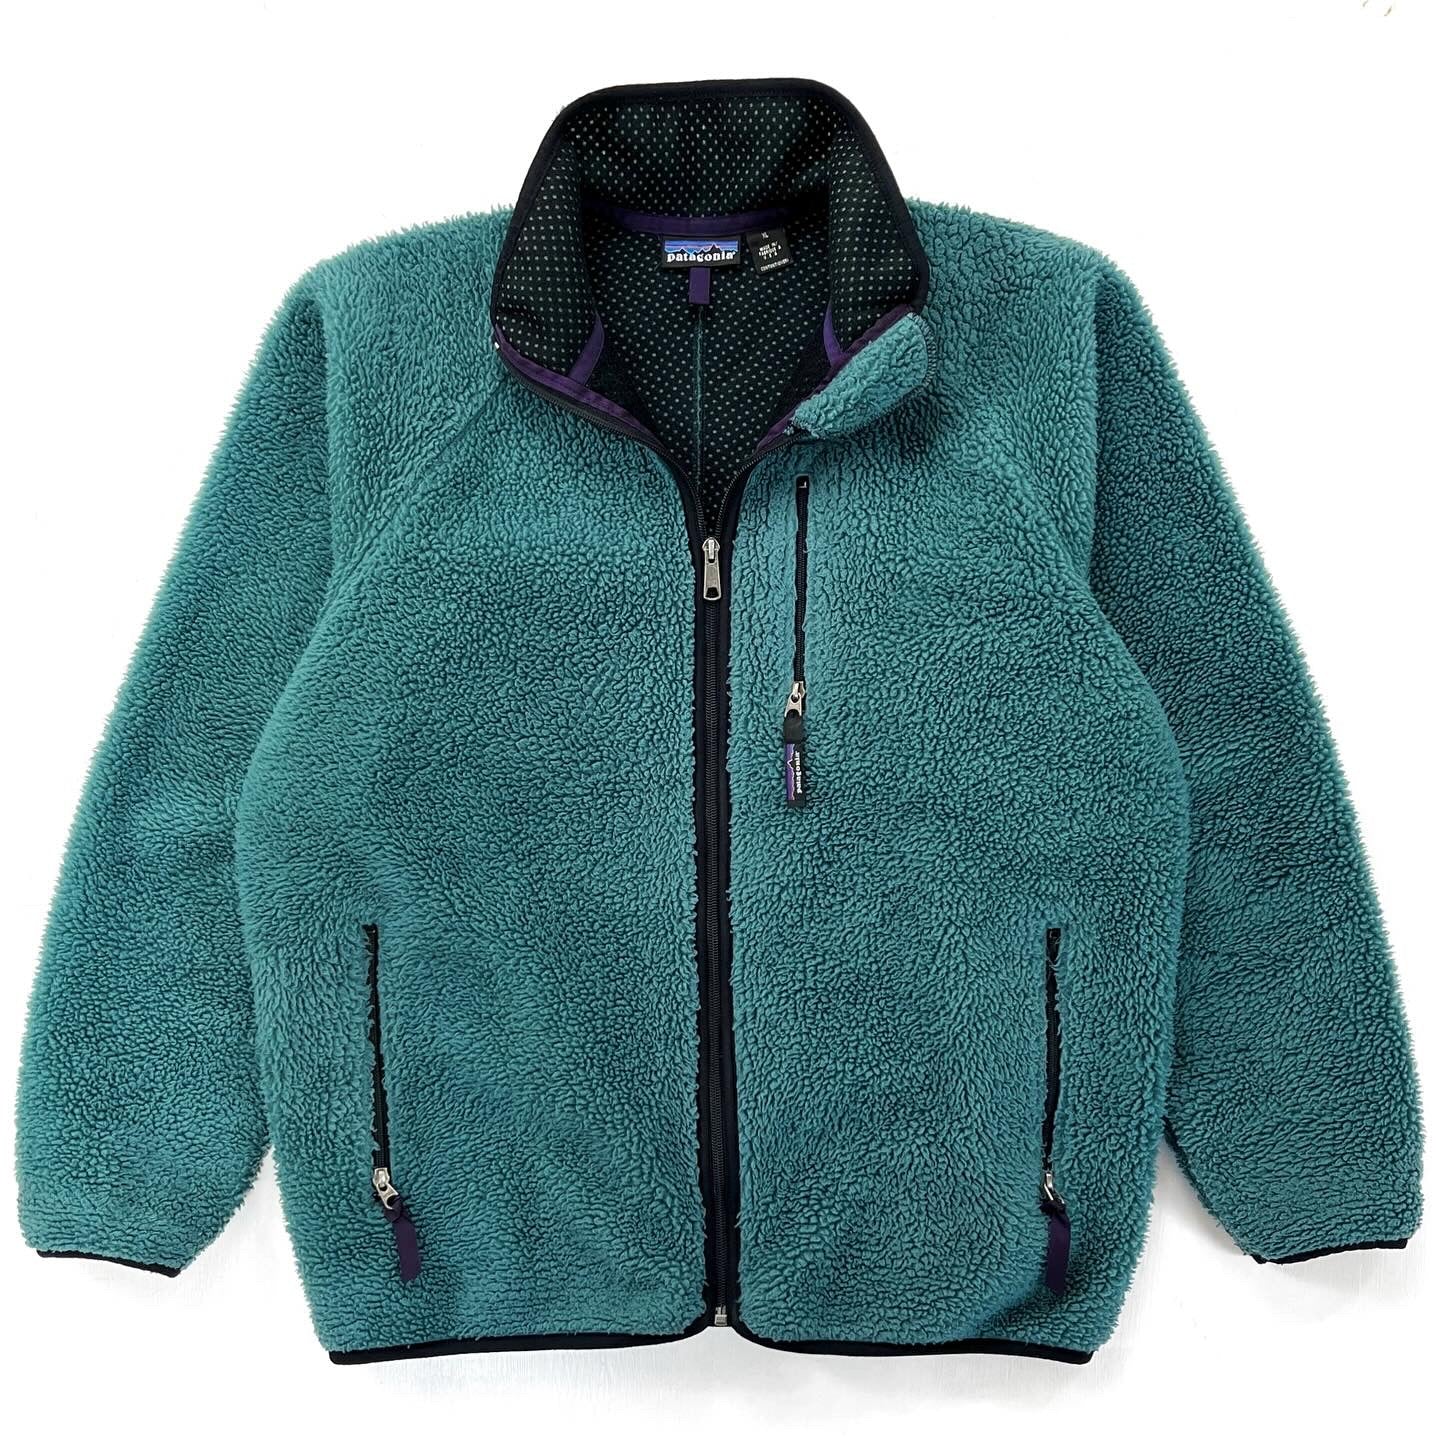 1997 Patagonia Made In The U.S.A. Retro Pile Cardigan, Fir Green (XL)